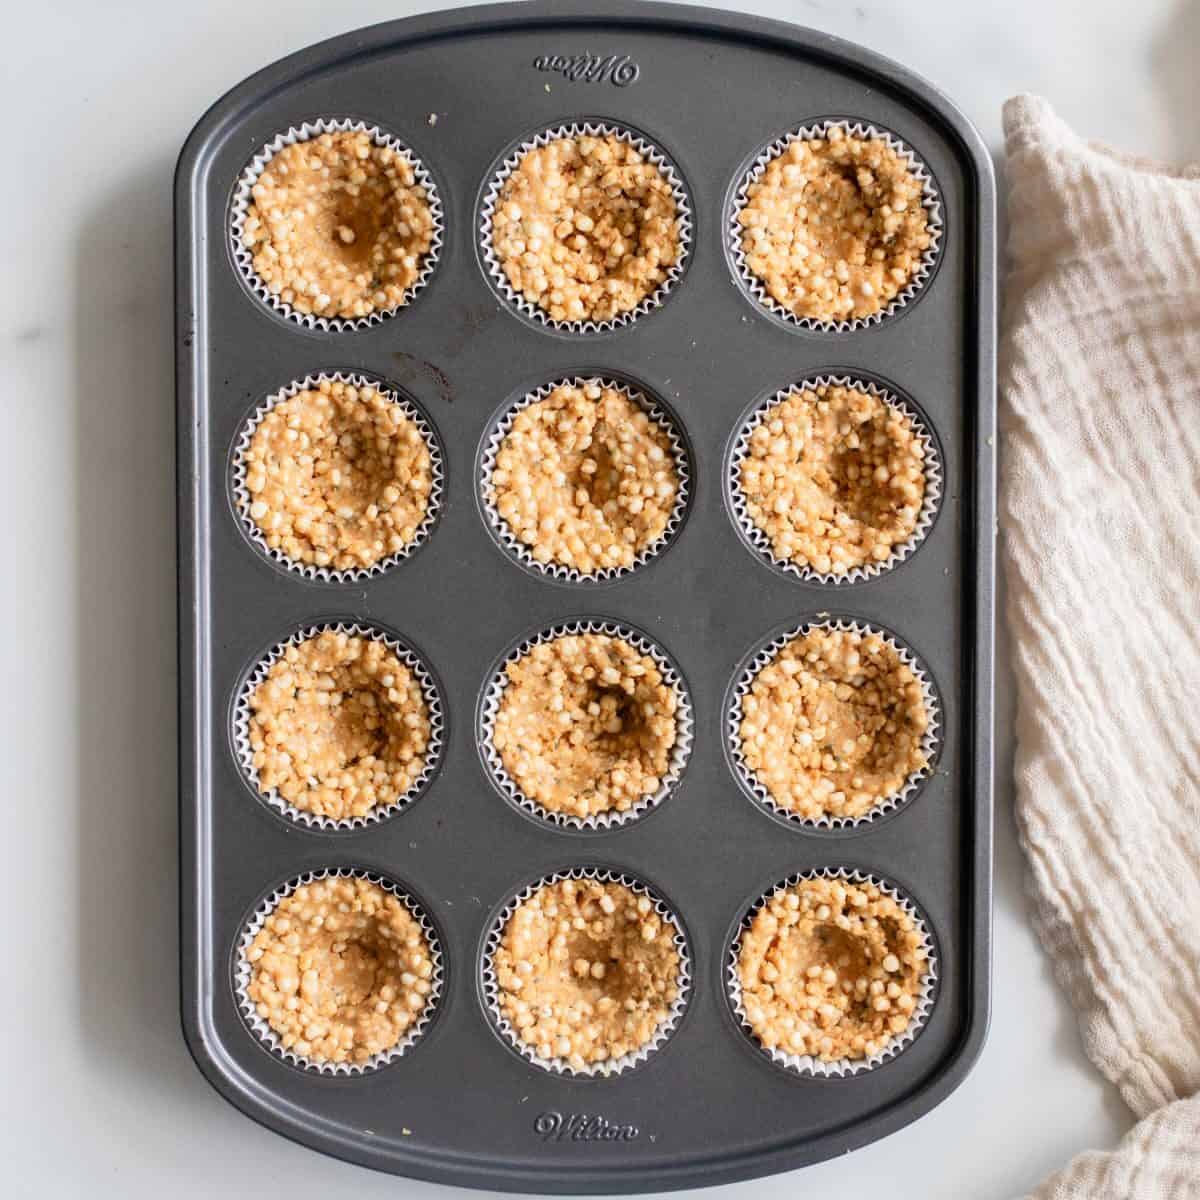 Puffed quinoa mixture pressed into lined muffin tin.